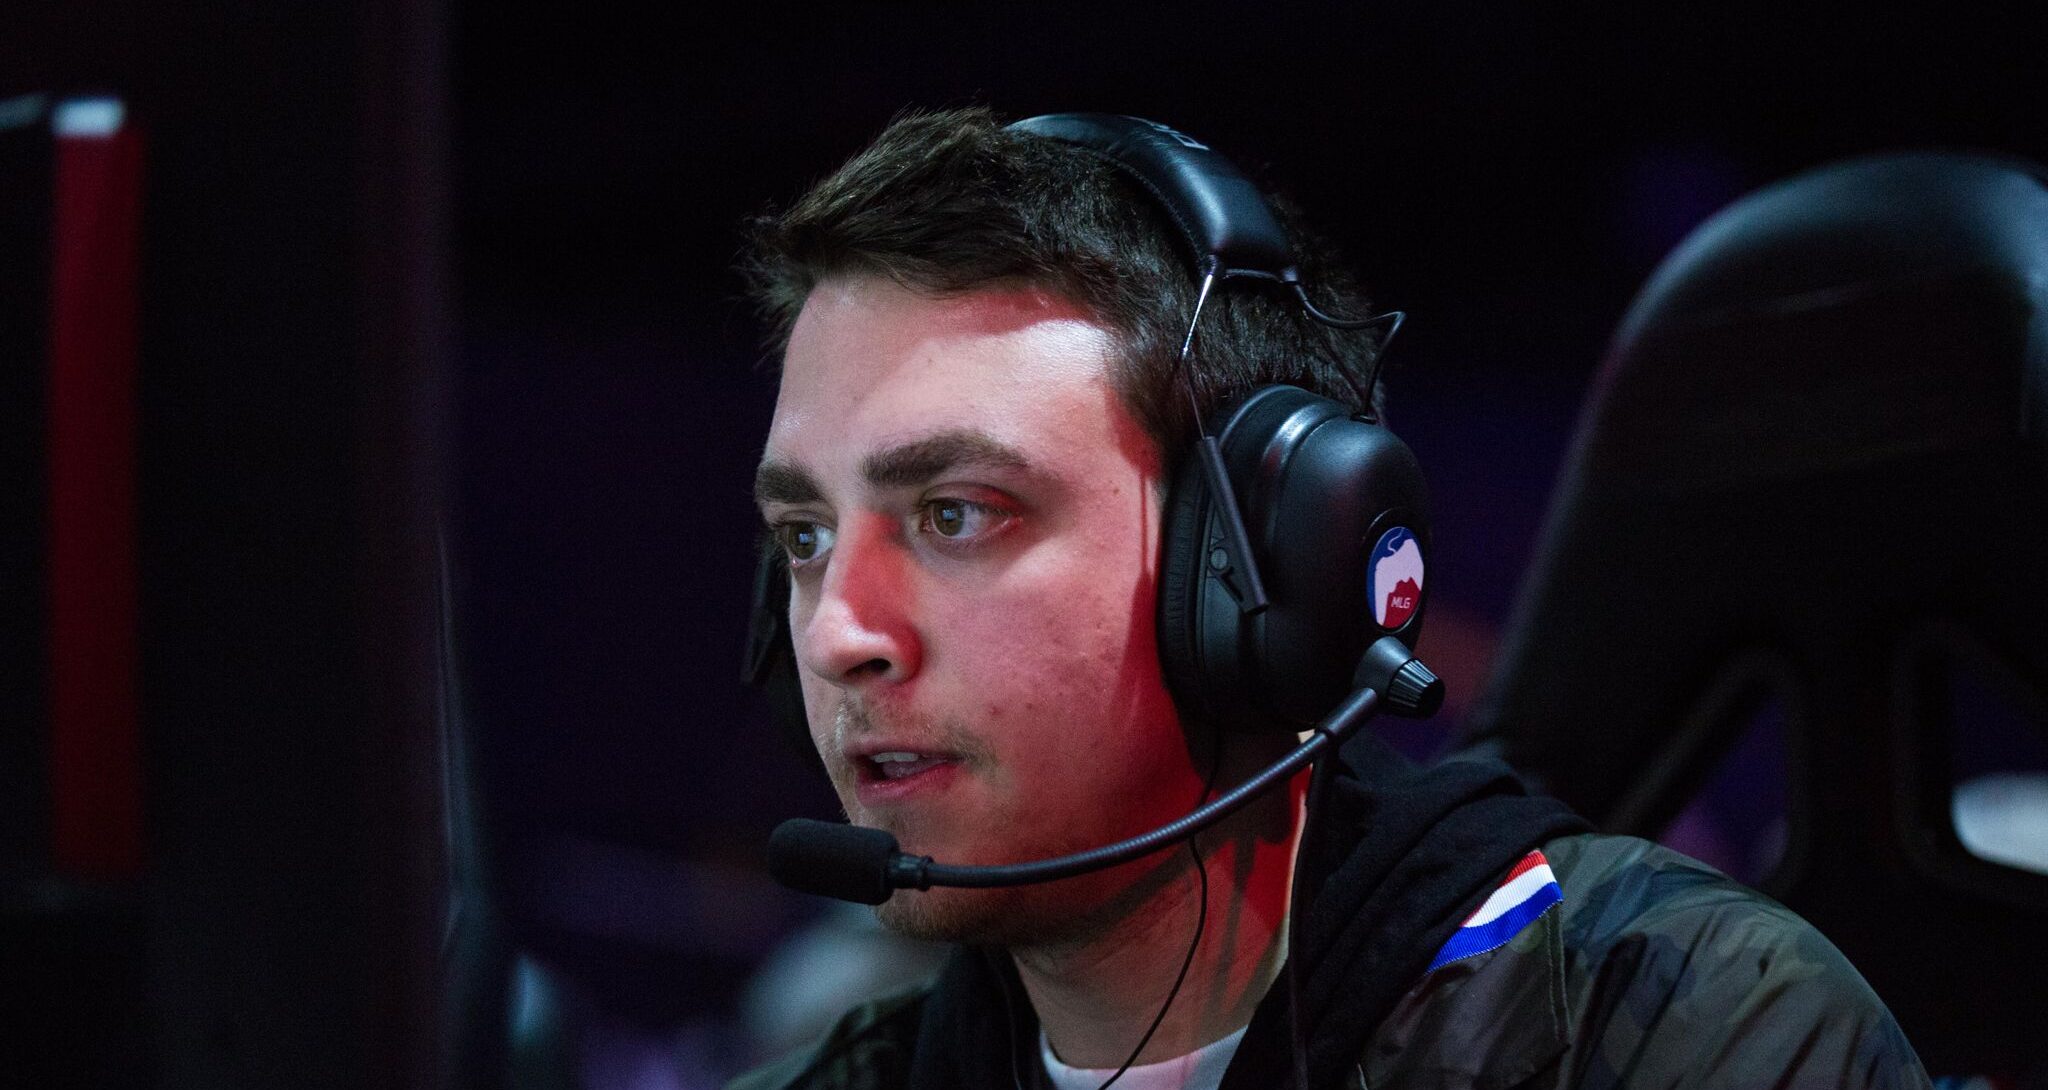 Clayster and Shotzzy join Dallas Call of Duty franchise